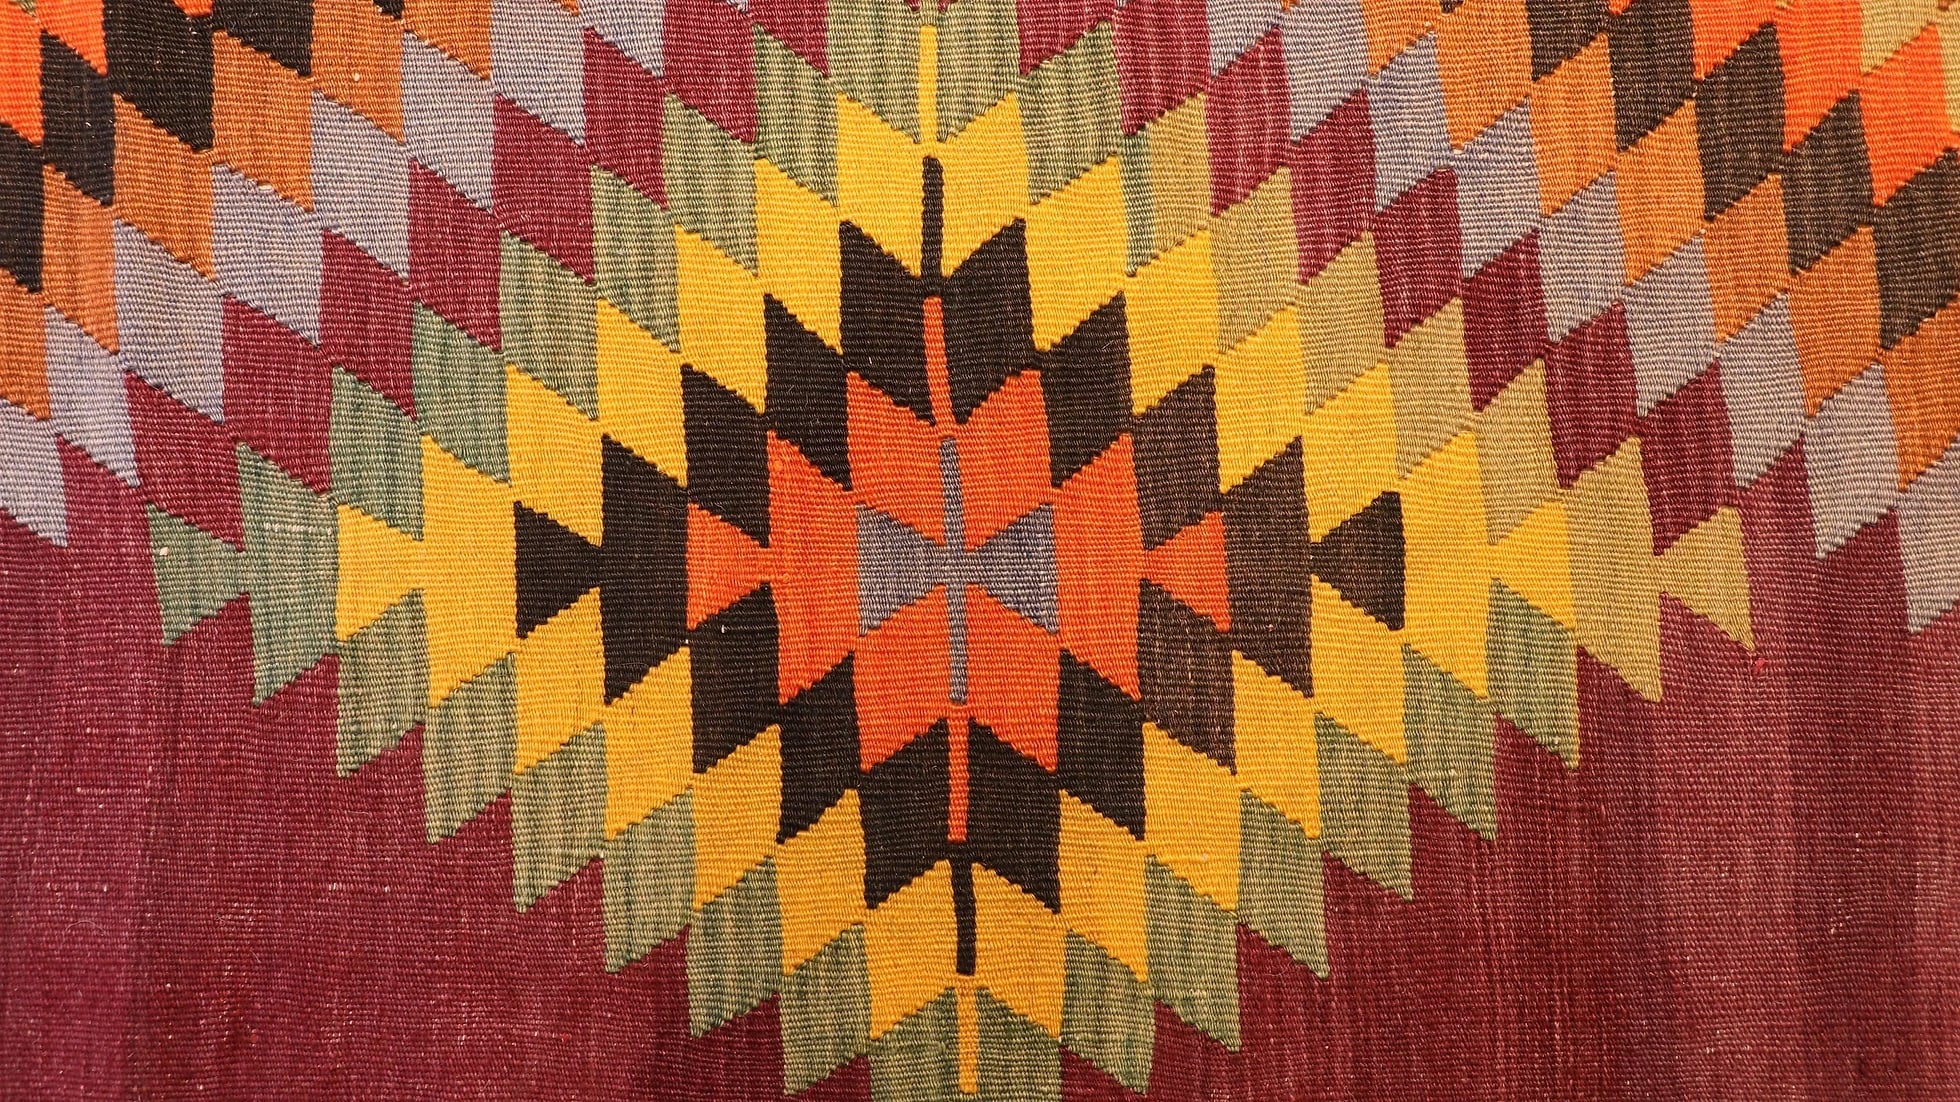 zoom in on the traditional lozenge motif in green, yellow, black, and orange of the vintage runner rug by Kilim Couture New York